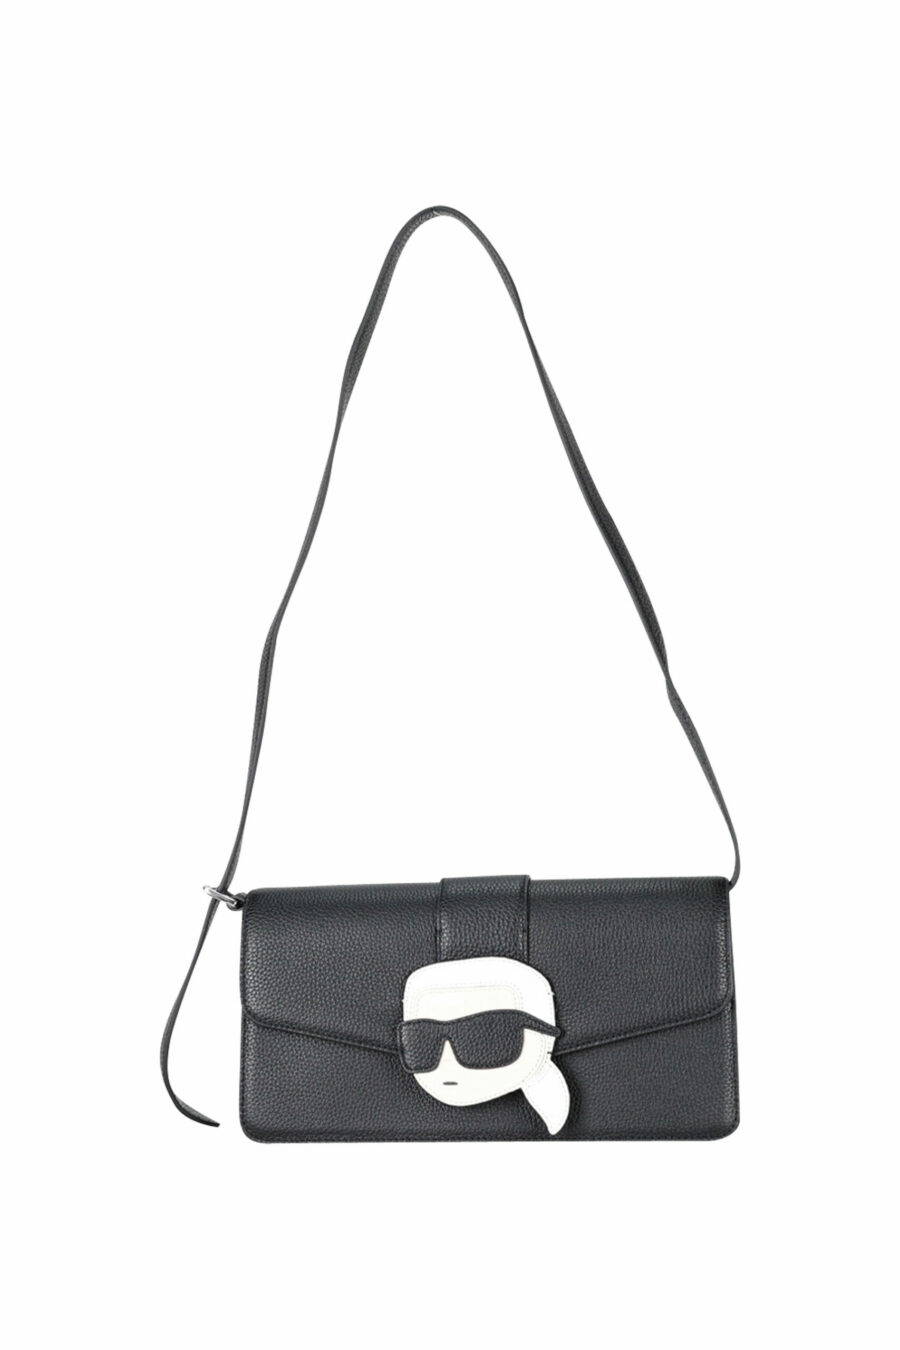 Small shoulder bag with "karl" maxilogo on flap - 8720744416531 scaled